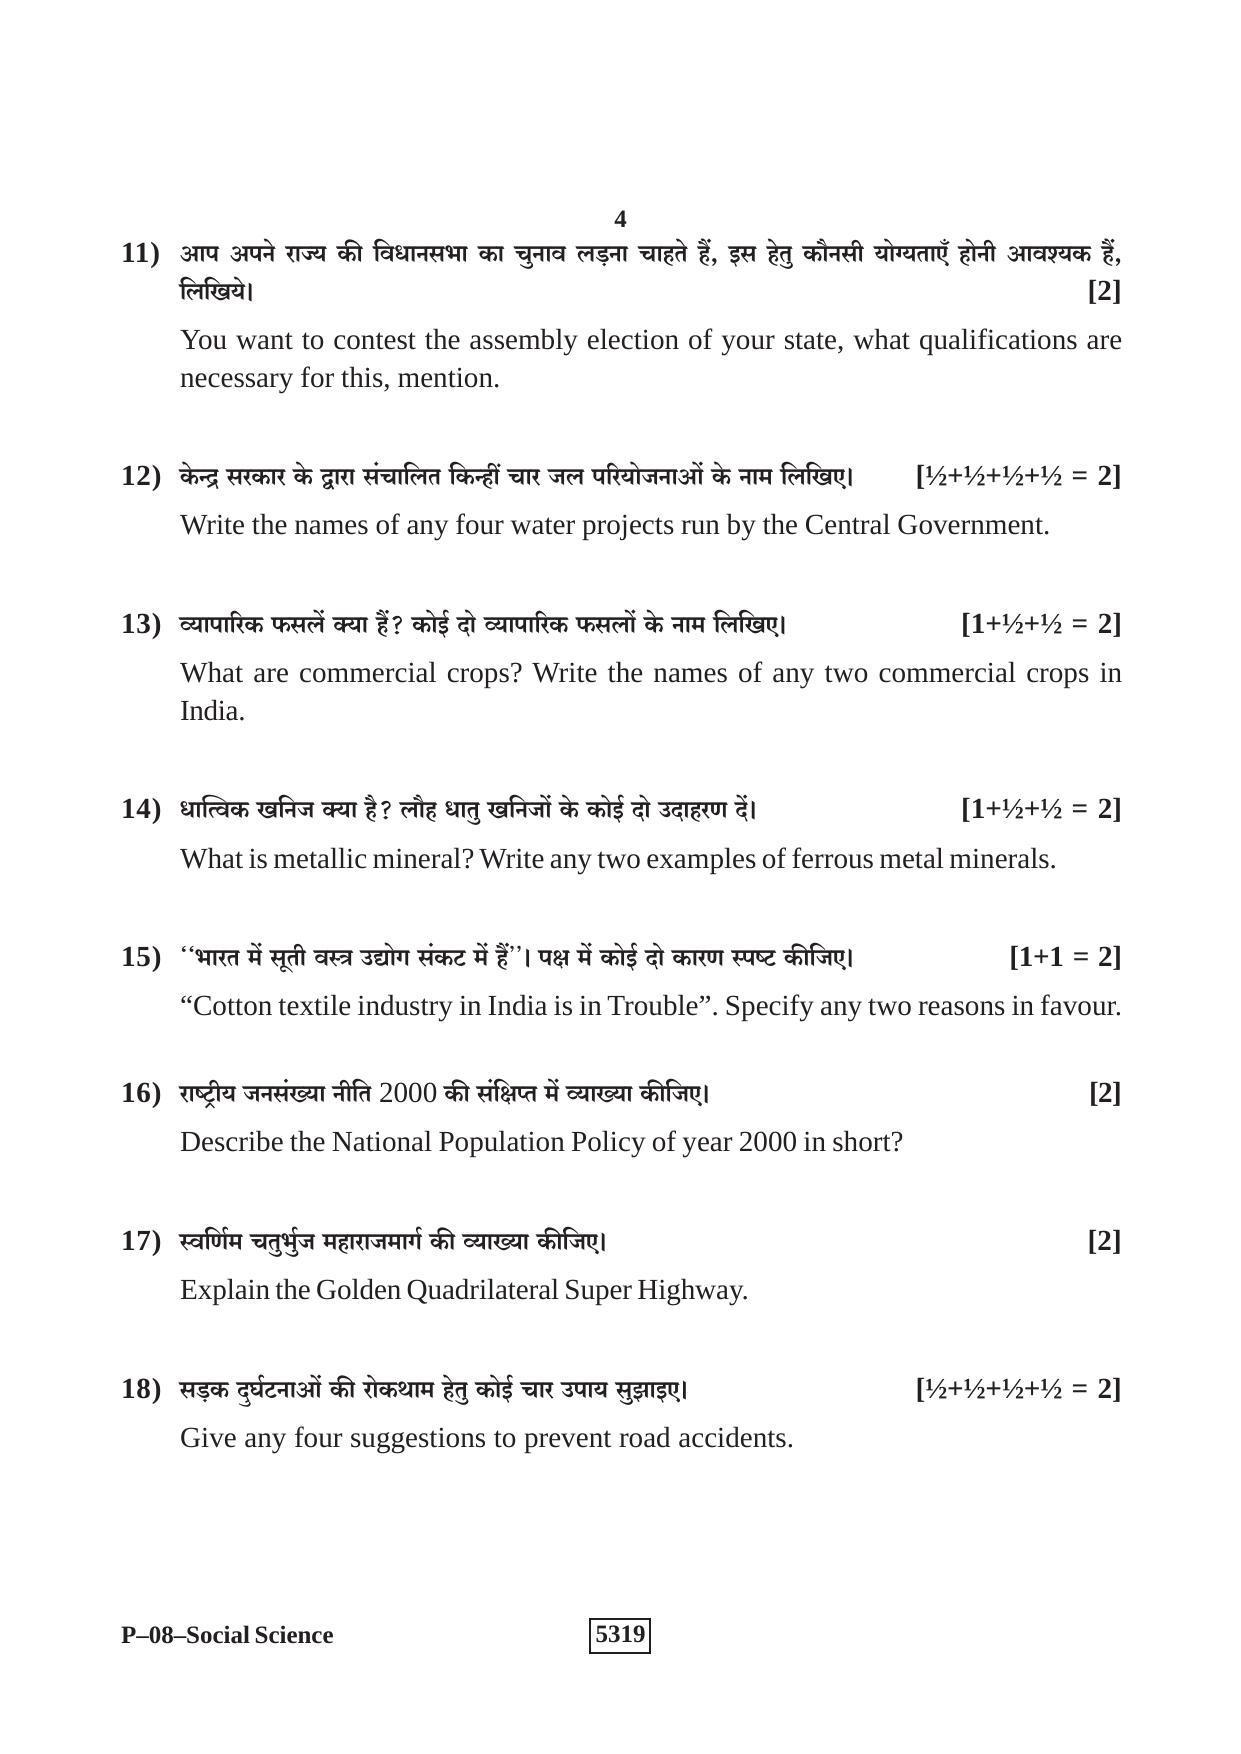 RBSE 2020 Social Science Praveshika Question Paper - Page 4